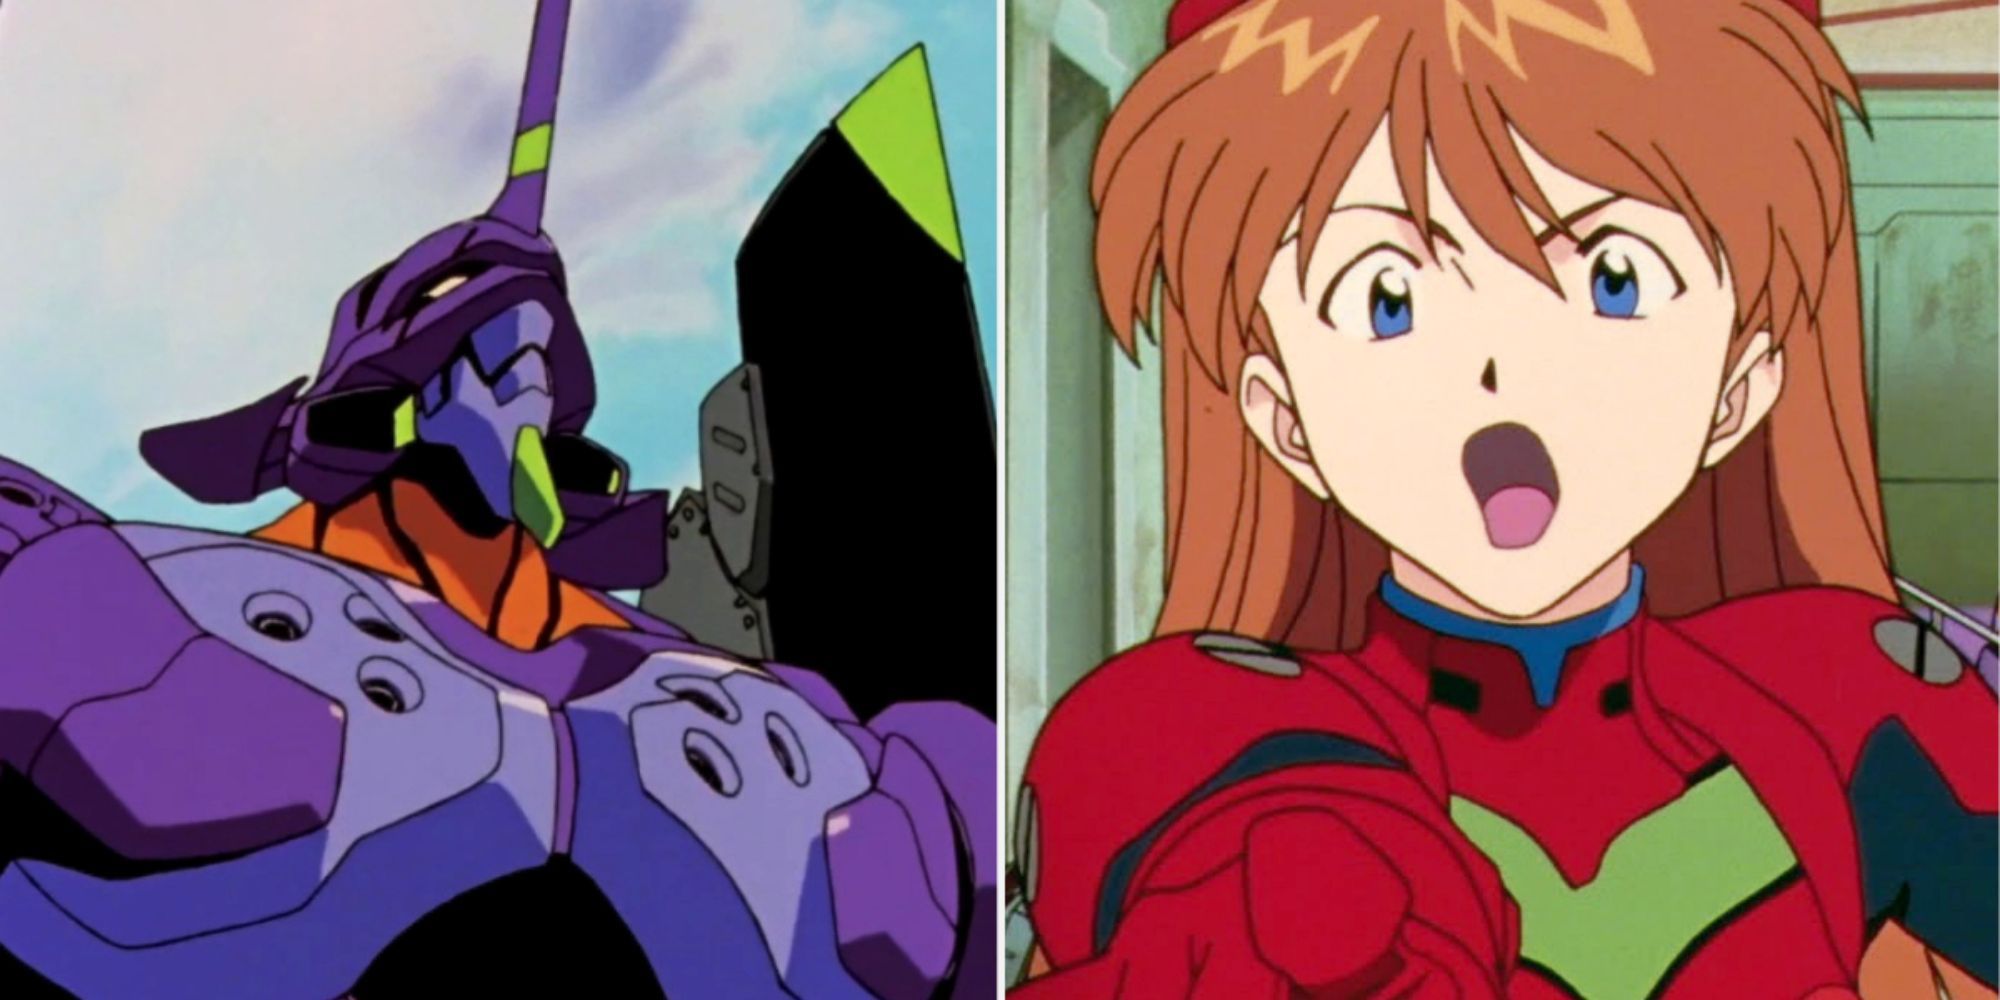 Evangelion Creator Wants To Take A Break After 30 Years Of Work